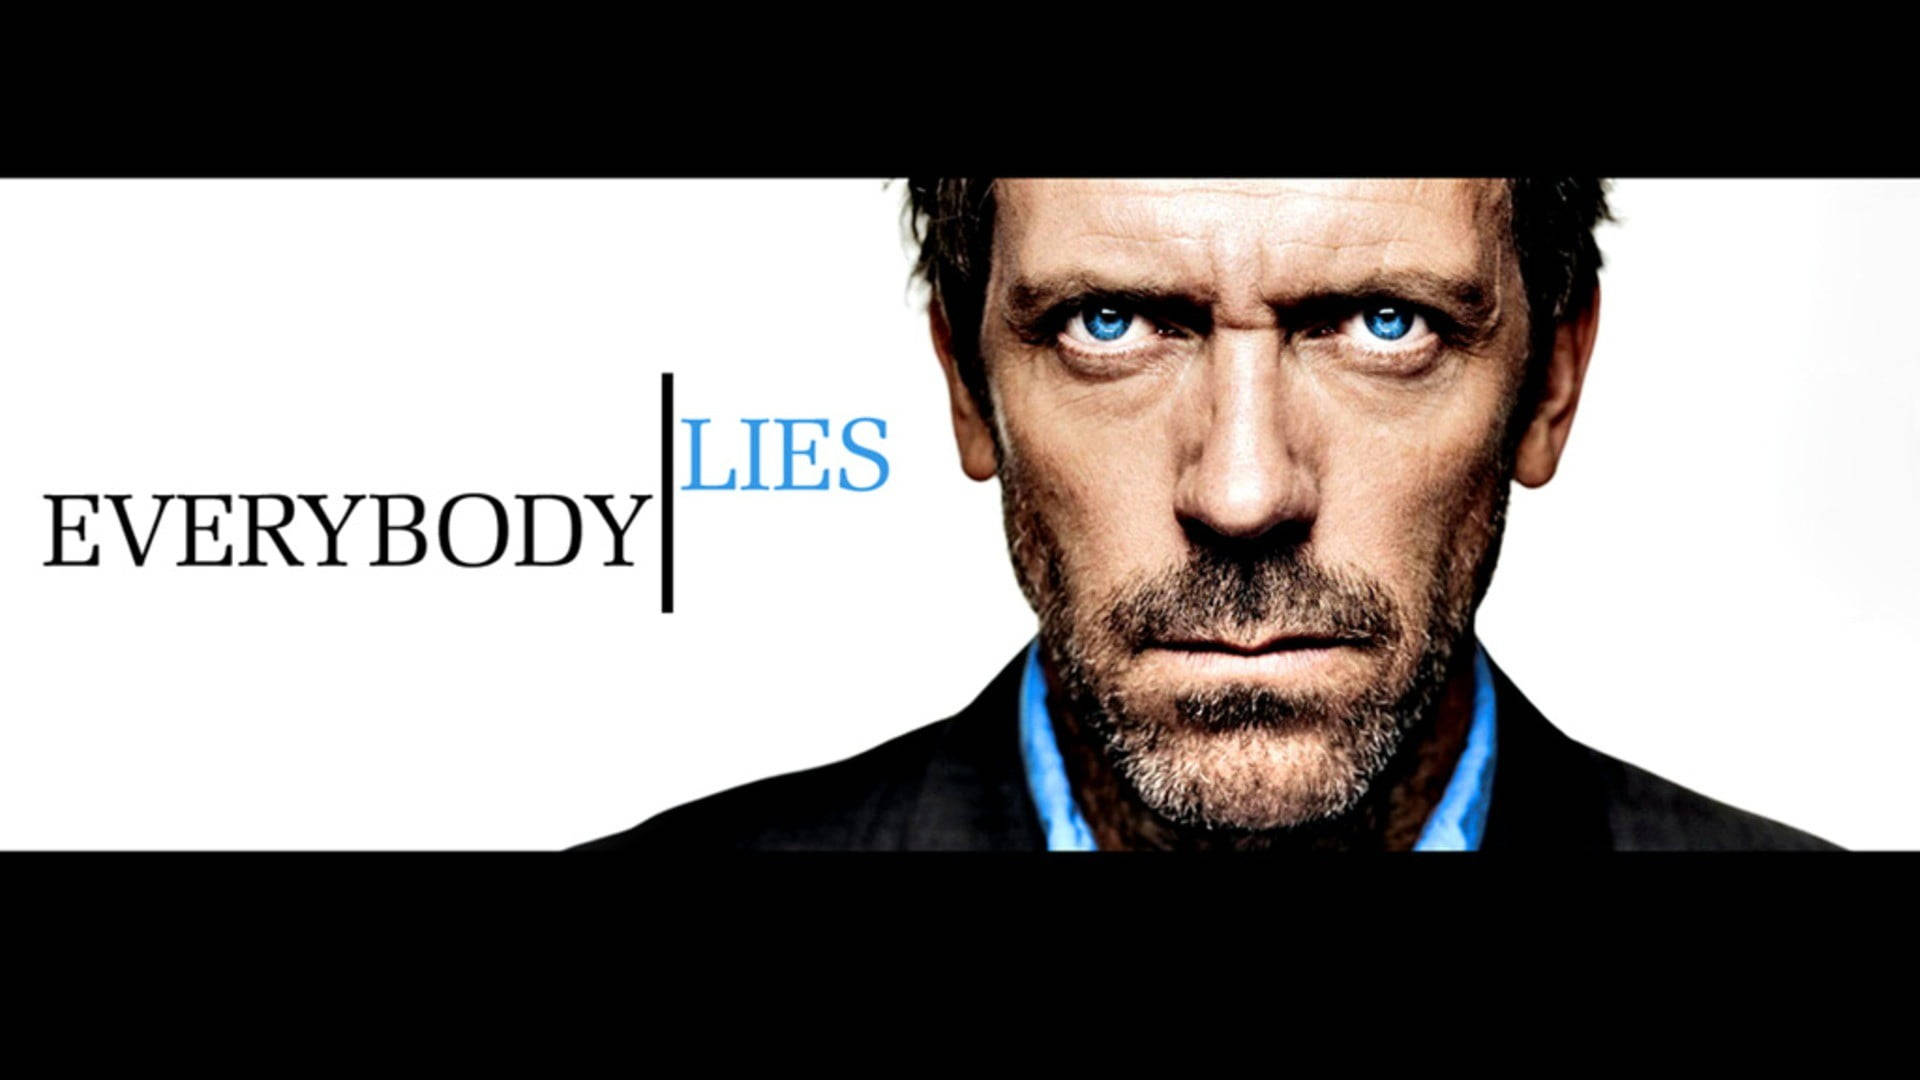 Dr. Gregory House - Everybody Lies Wallpaper